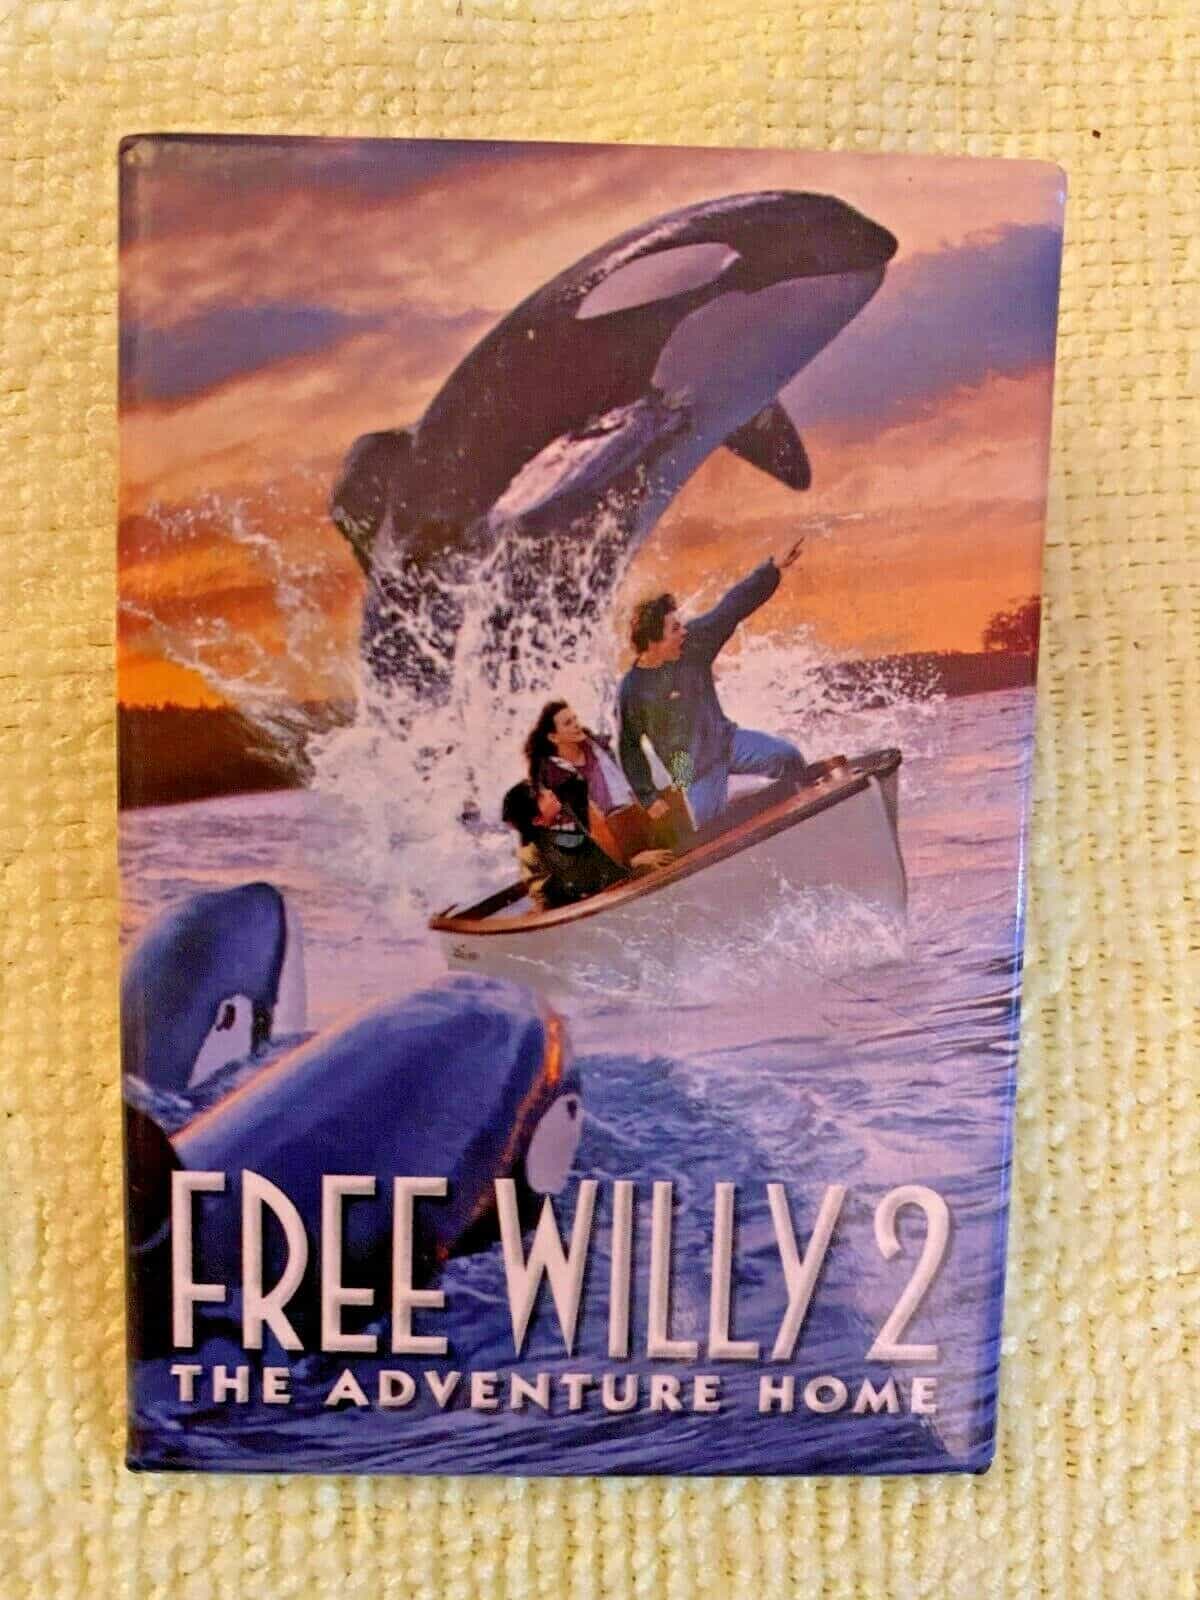 Free Willy 2 Movie Collector Button